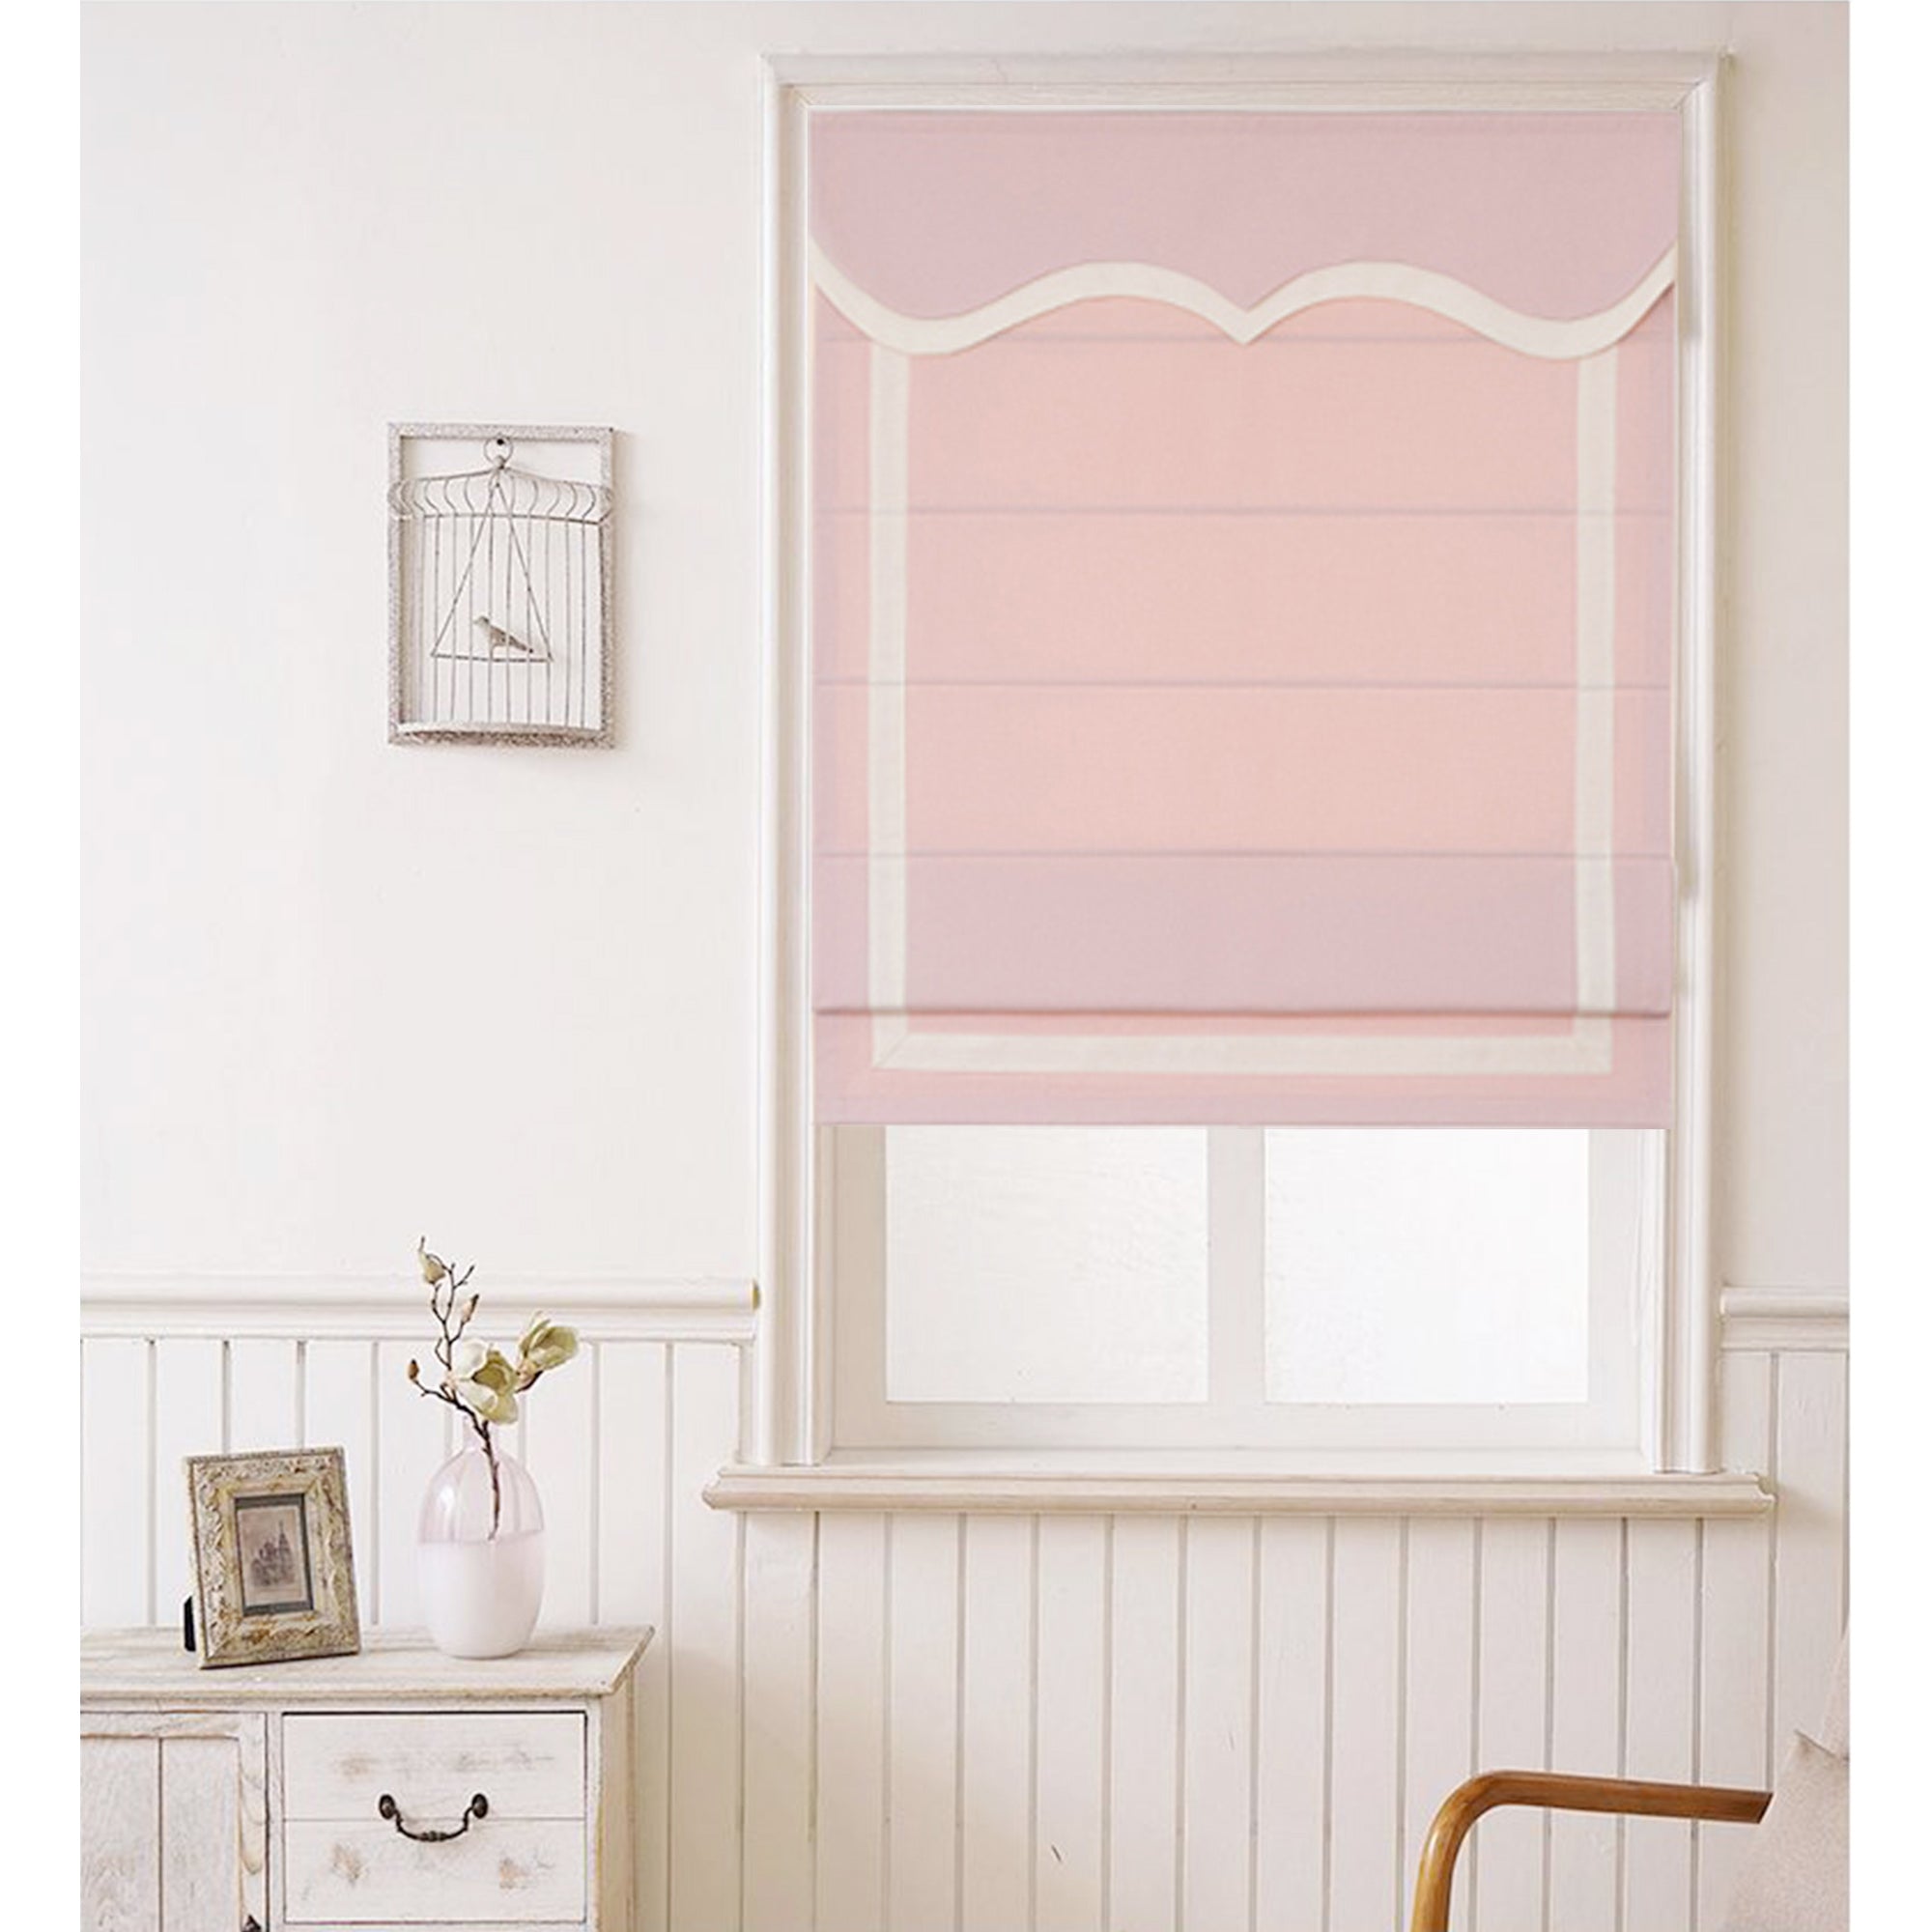 Quick Fix Washable Roman Window Shades Flat Fold with Valance, SG-011 Pink with White Trim